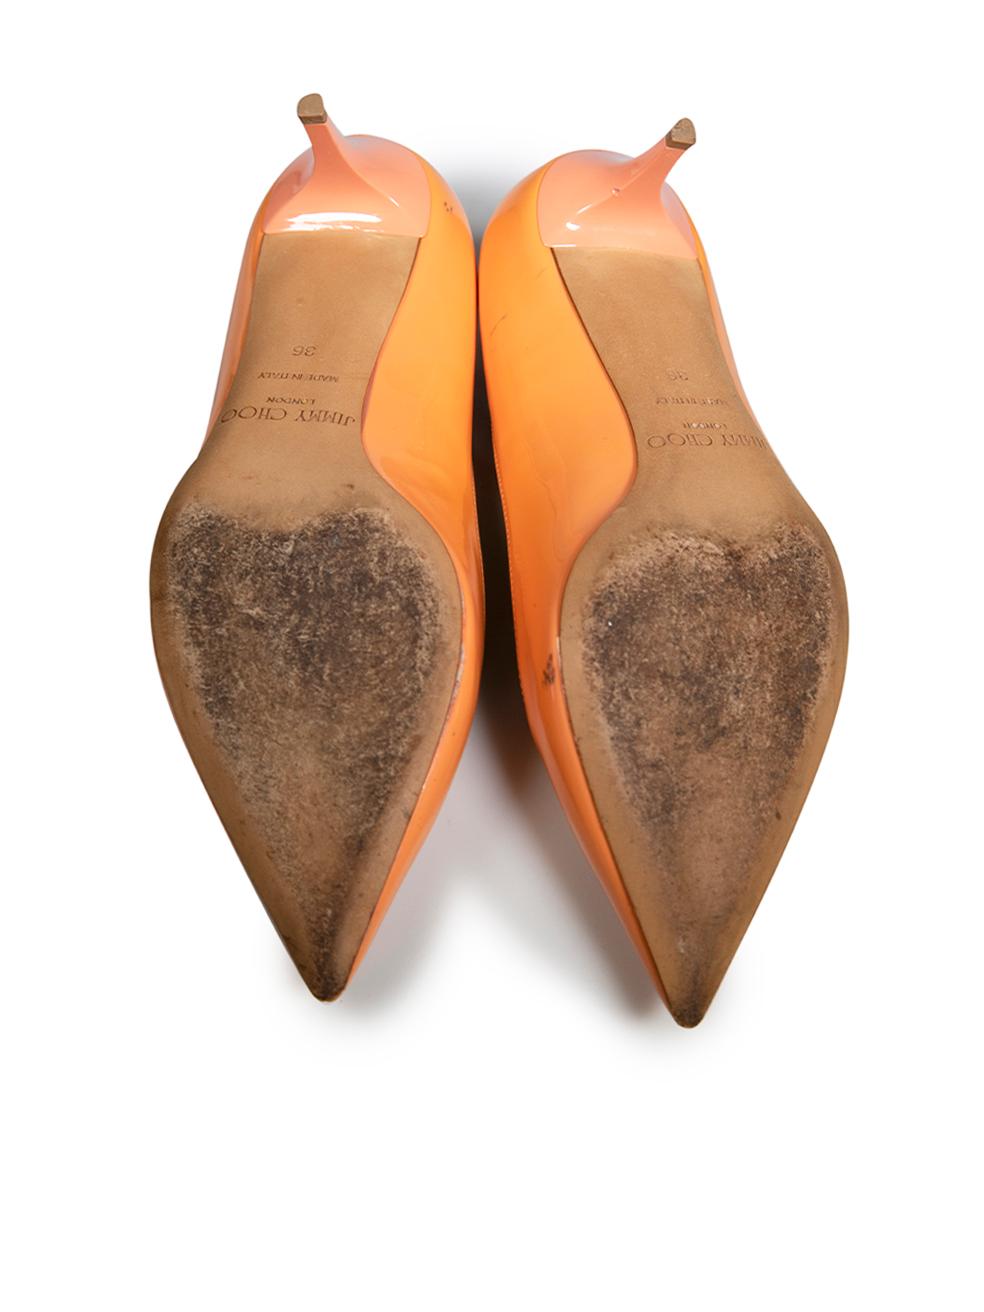 Jimmy Choo Orange Patent Leather Pumps Size IT 36 In Good Condition For Sale In London, GB